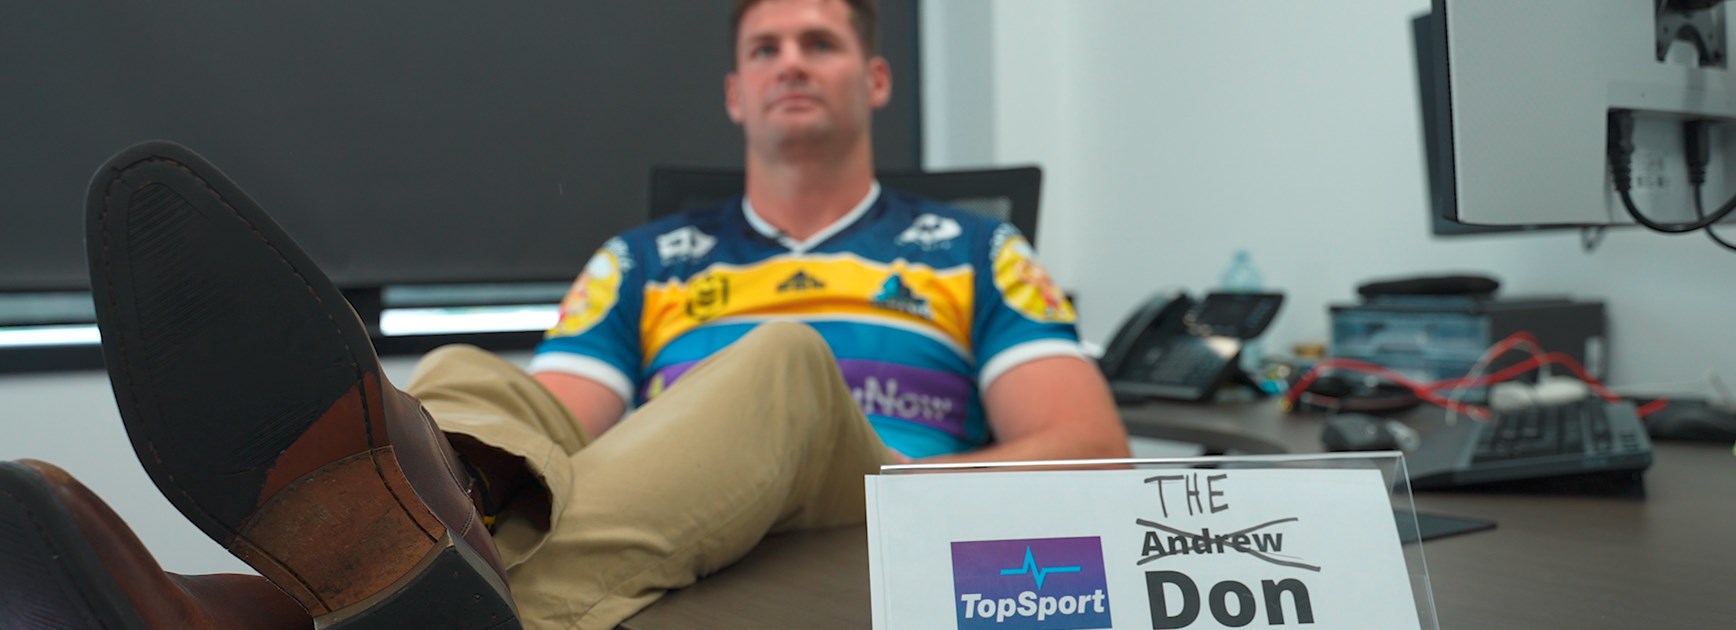 Anthony Don joins TopSport, TopSport join Titans